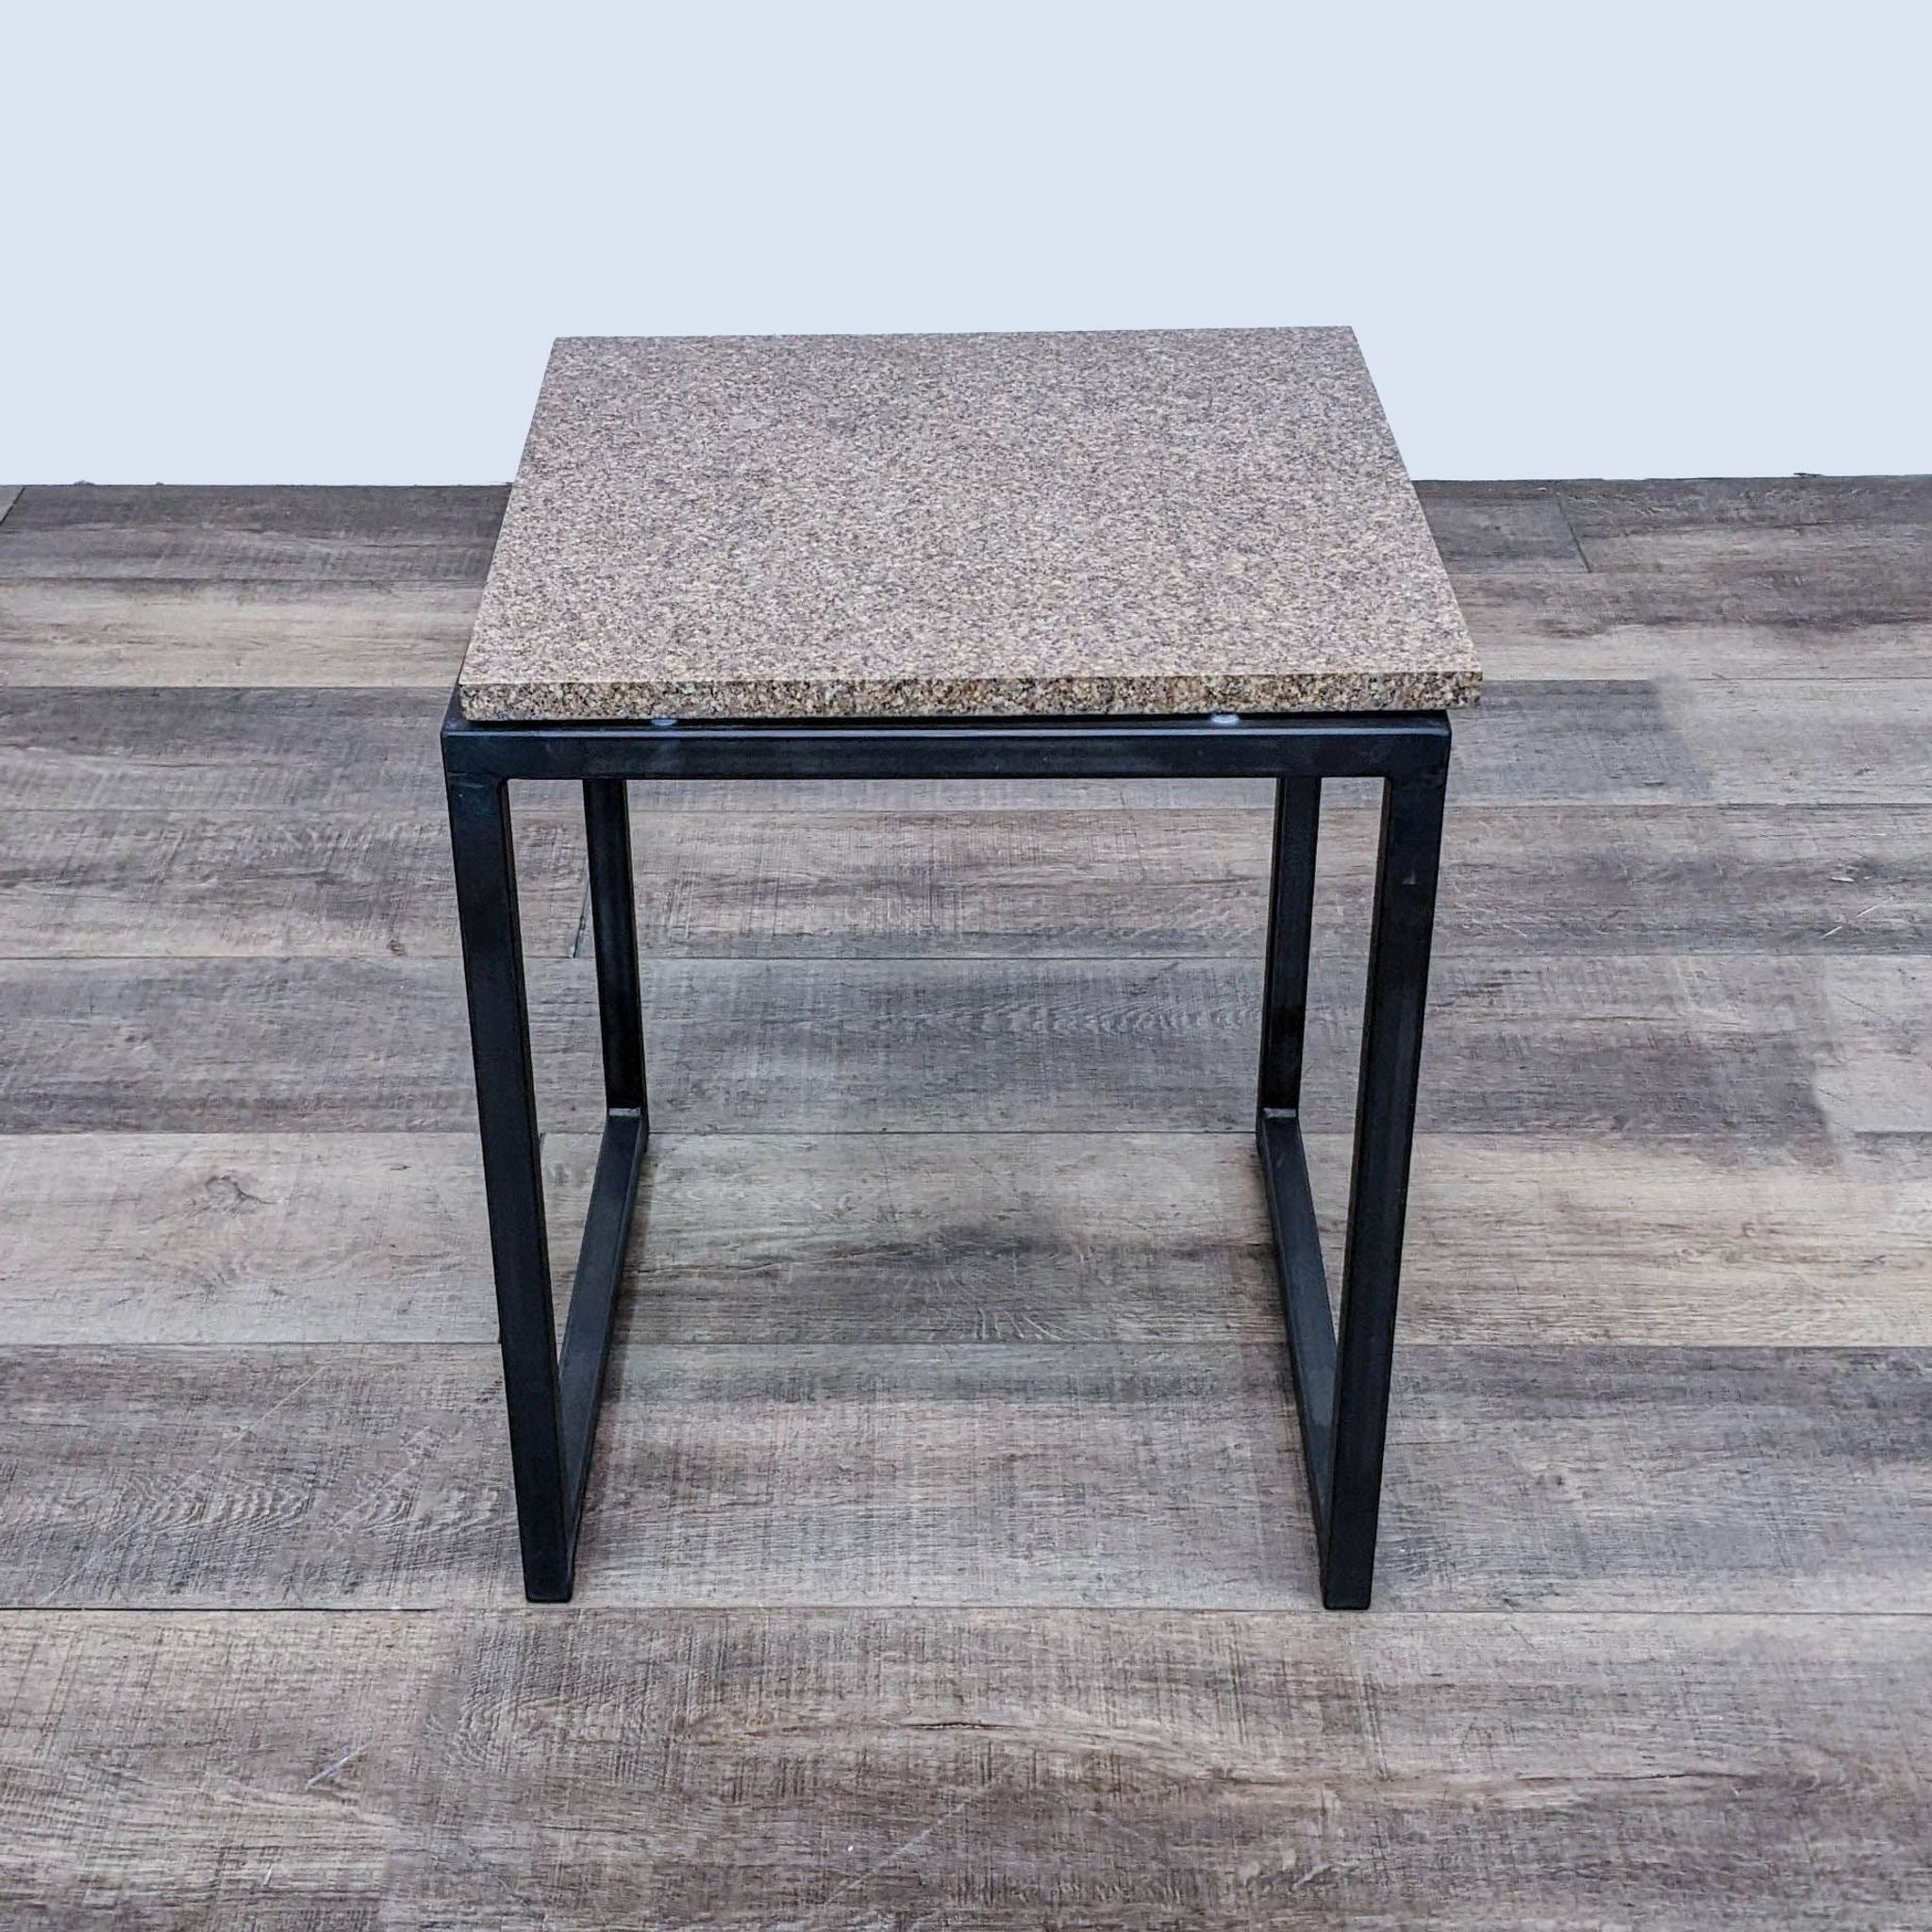 Room & Board side table with a speckled top and metal base on a wood floor.